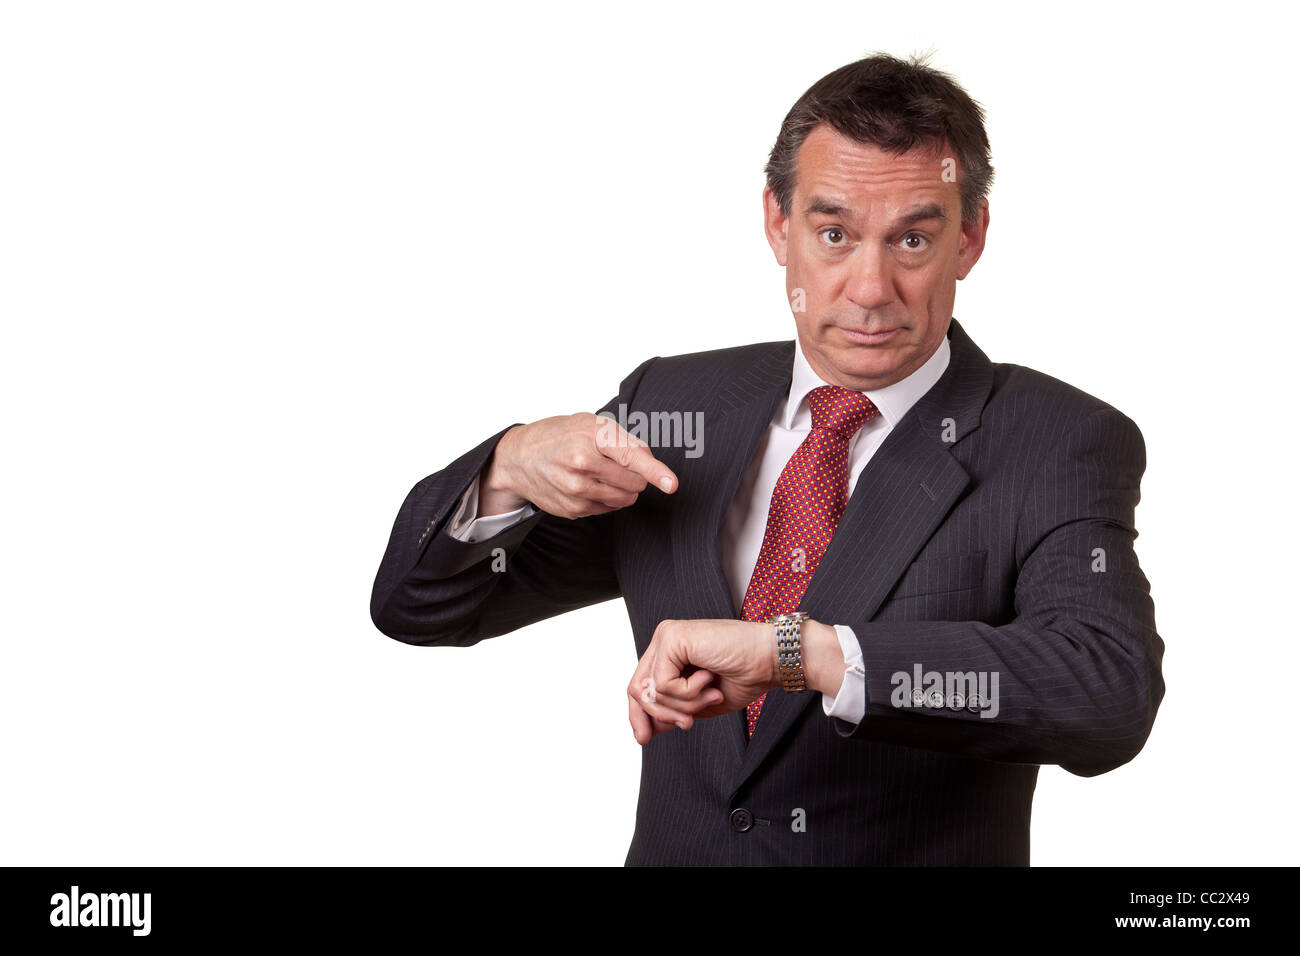 Annoyed Angry Middle Age Business Man Pointing at Time on Watch Stock Photo